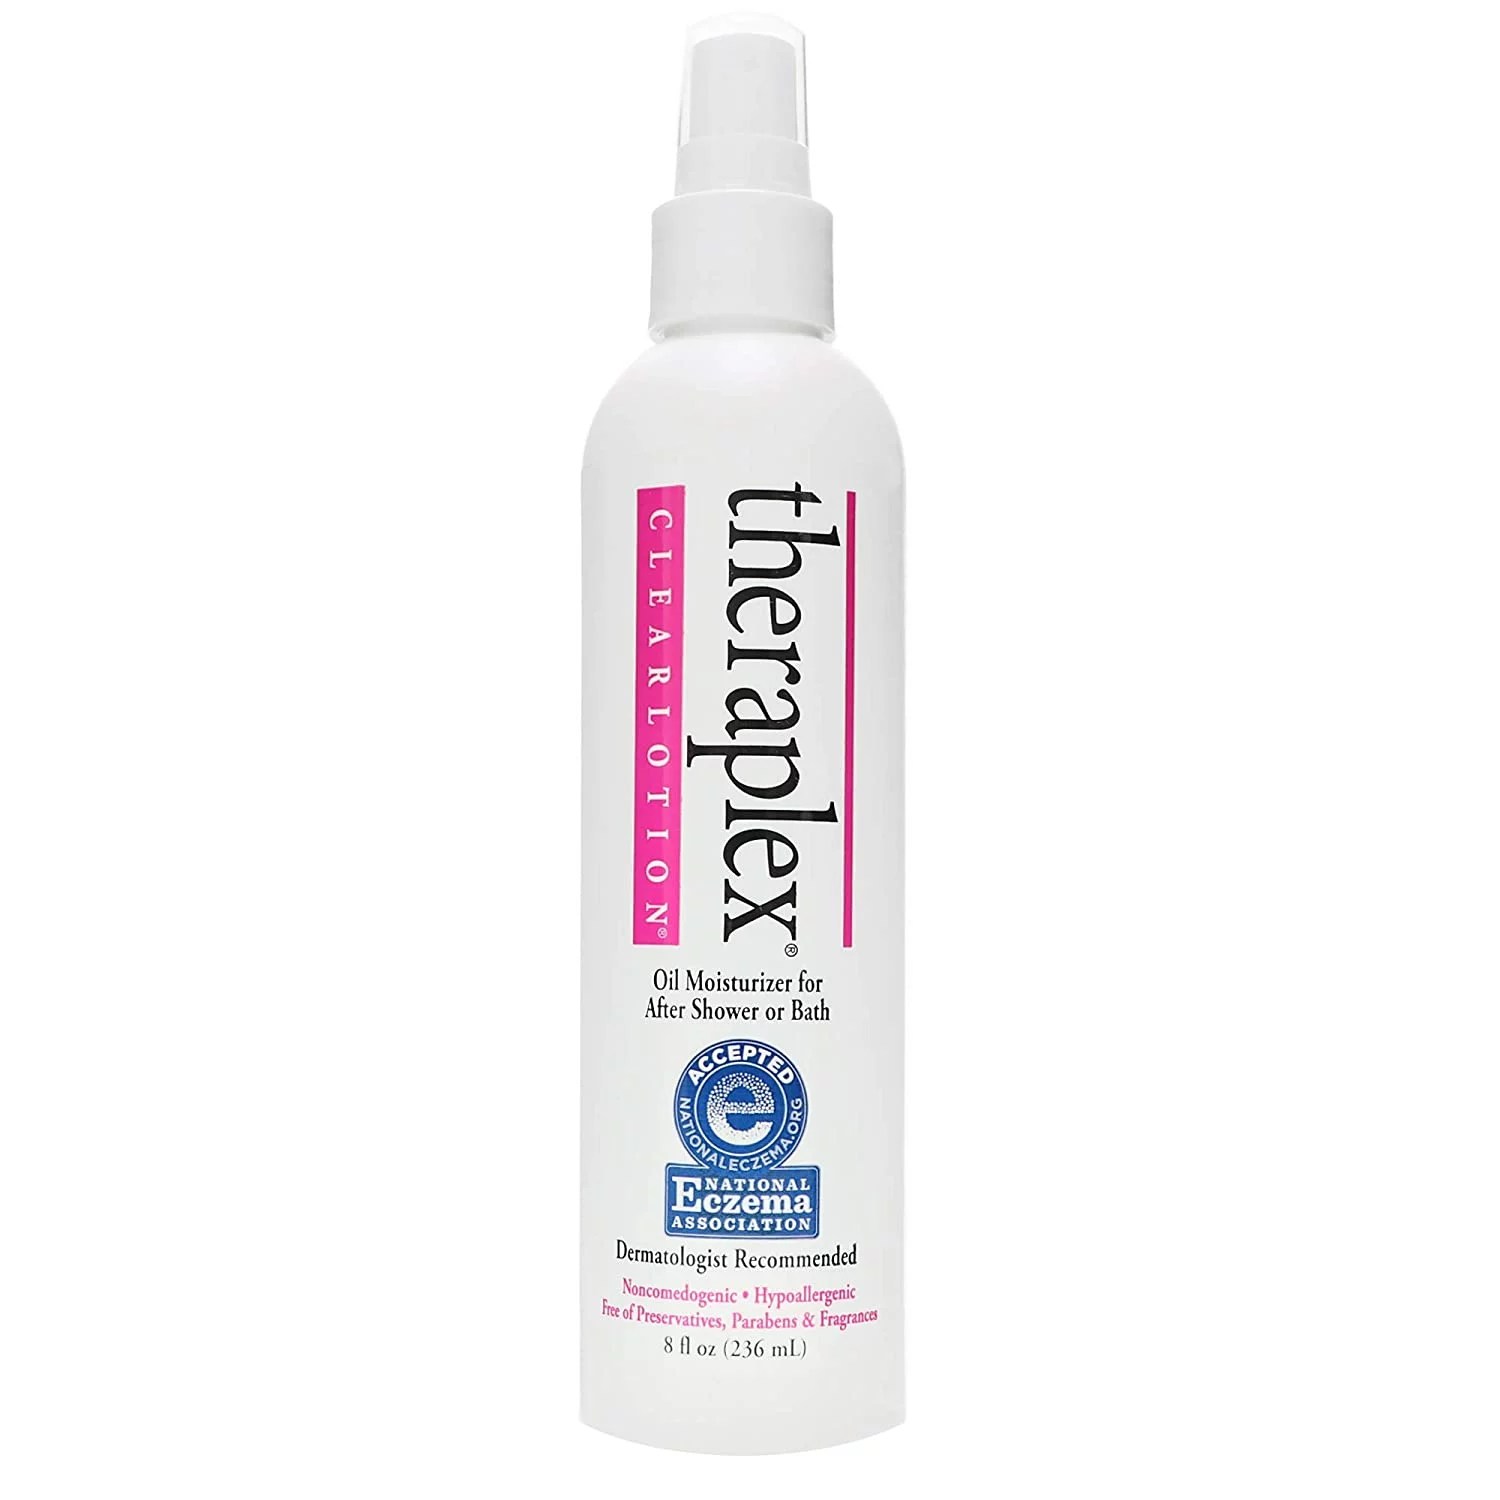 Theraplex ClearLotion, dermatologist's favorite skin-care products